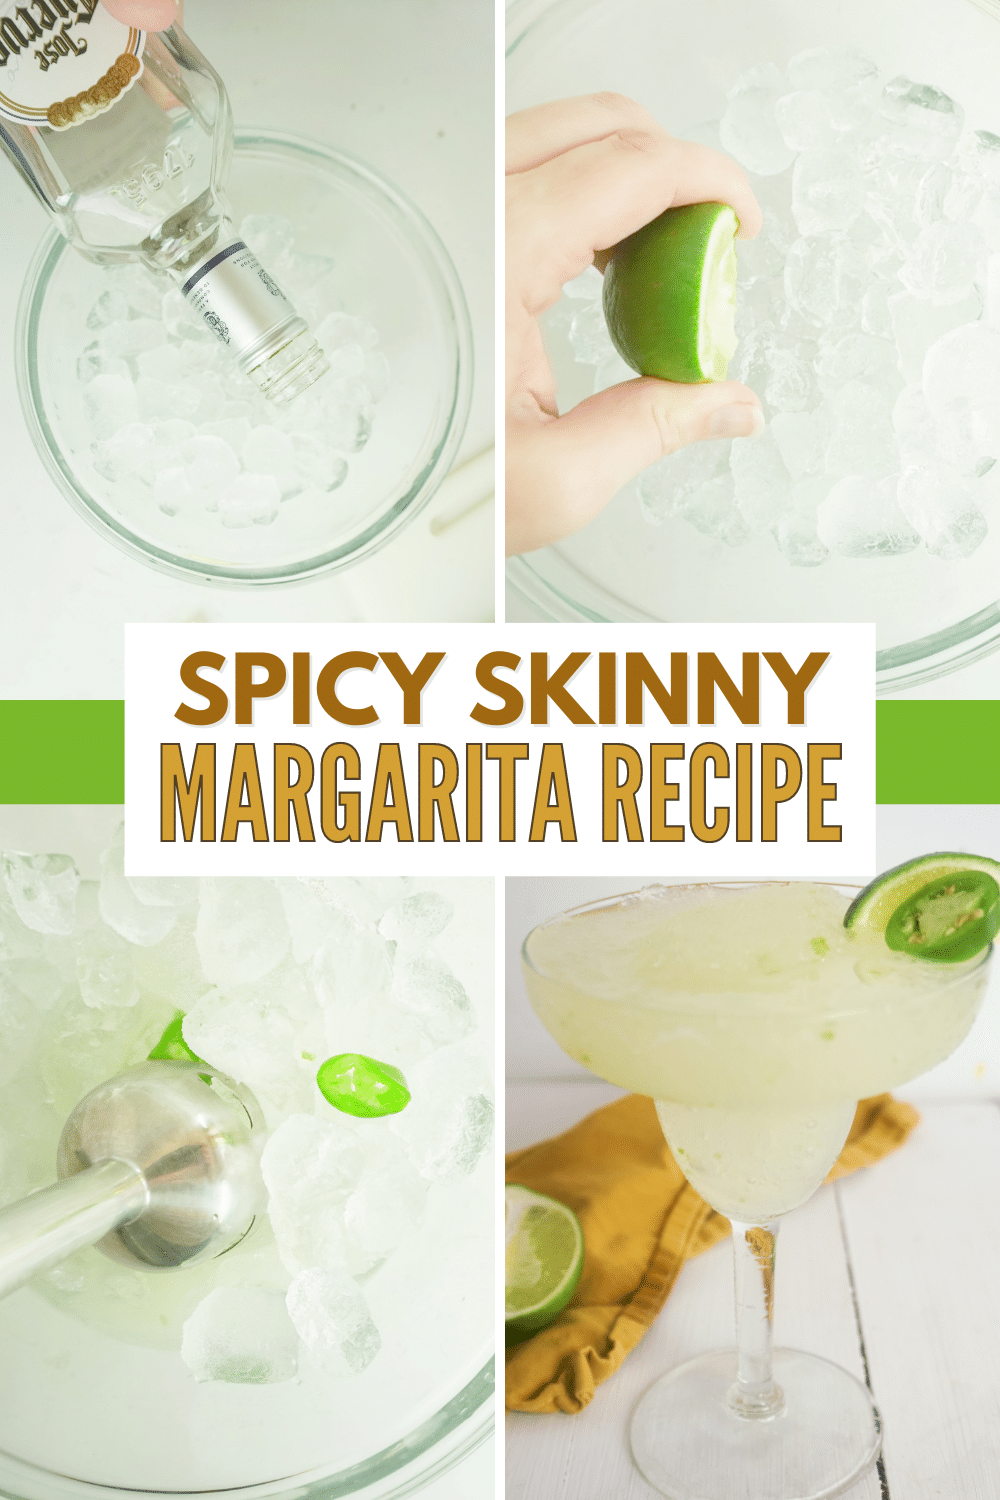 This Spicy Skinny Margarita Recipe is perfect for warm days and Cinco de Mayo parties. You can whip up this delicious drink in no time! #spicyskinnymargaritarecipe #margaritas #margaritarecipe #skinnymargarita #cocktail via @wondermomwannab